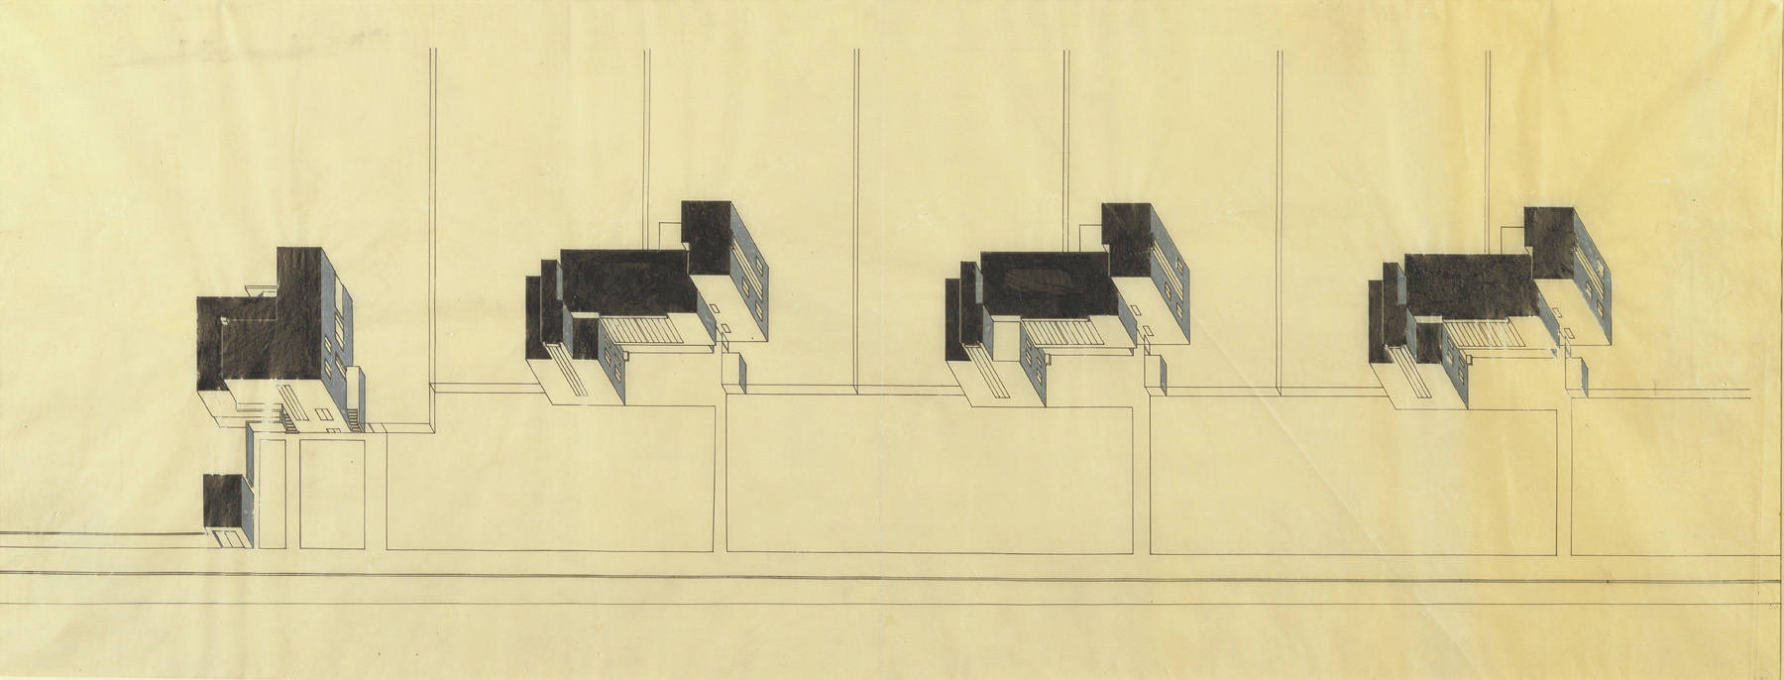 Gropius&rsquo; isometric design drawing of the Masters&rsquo; Houses. House Gropius, the largest is on the left, the others being six semi-detached houses in three blocks: Moholy-Nagy/Feiniger, Muche/Schlemmer, Kandinsky/Klee. (Drawing: Walter Gropius)